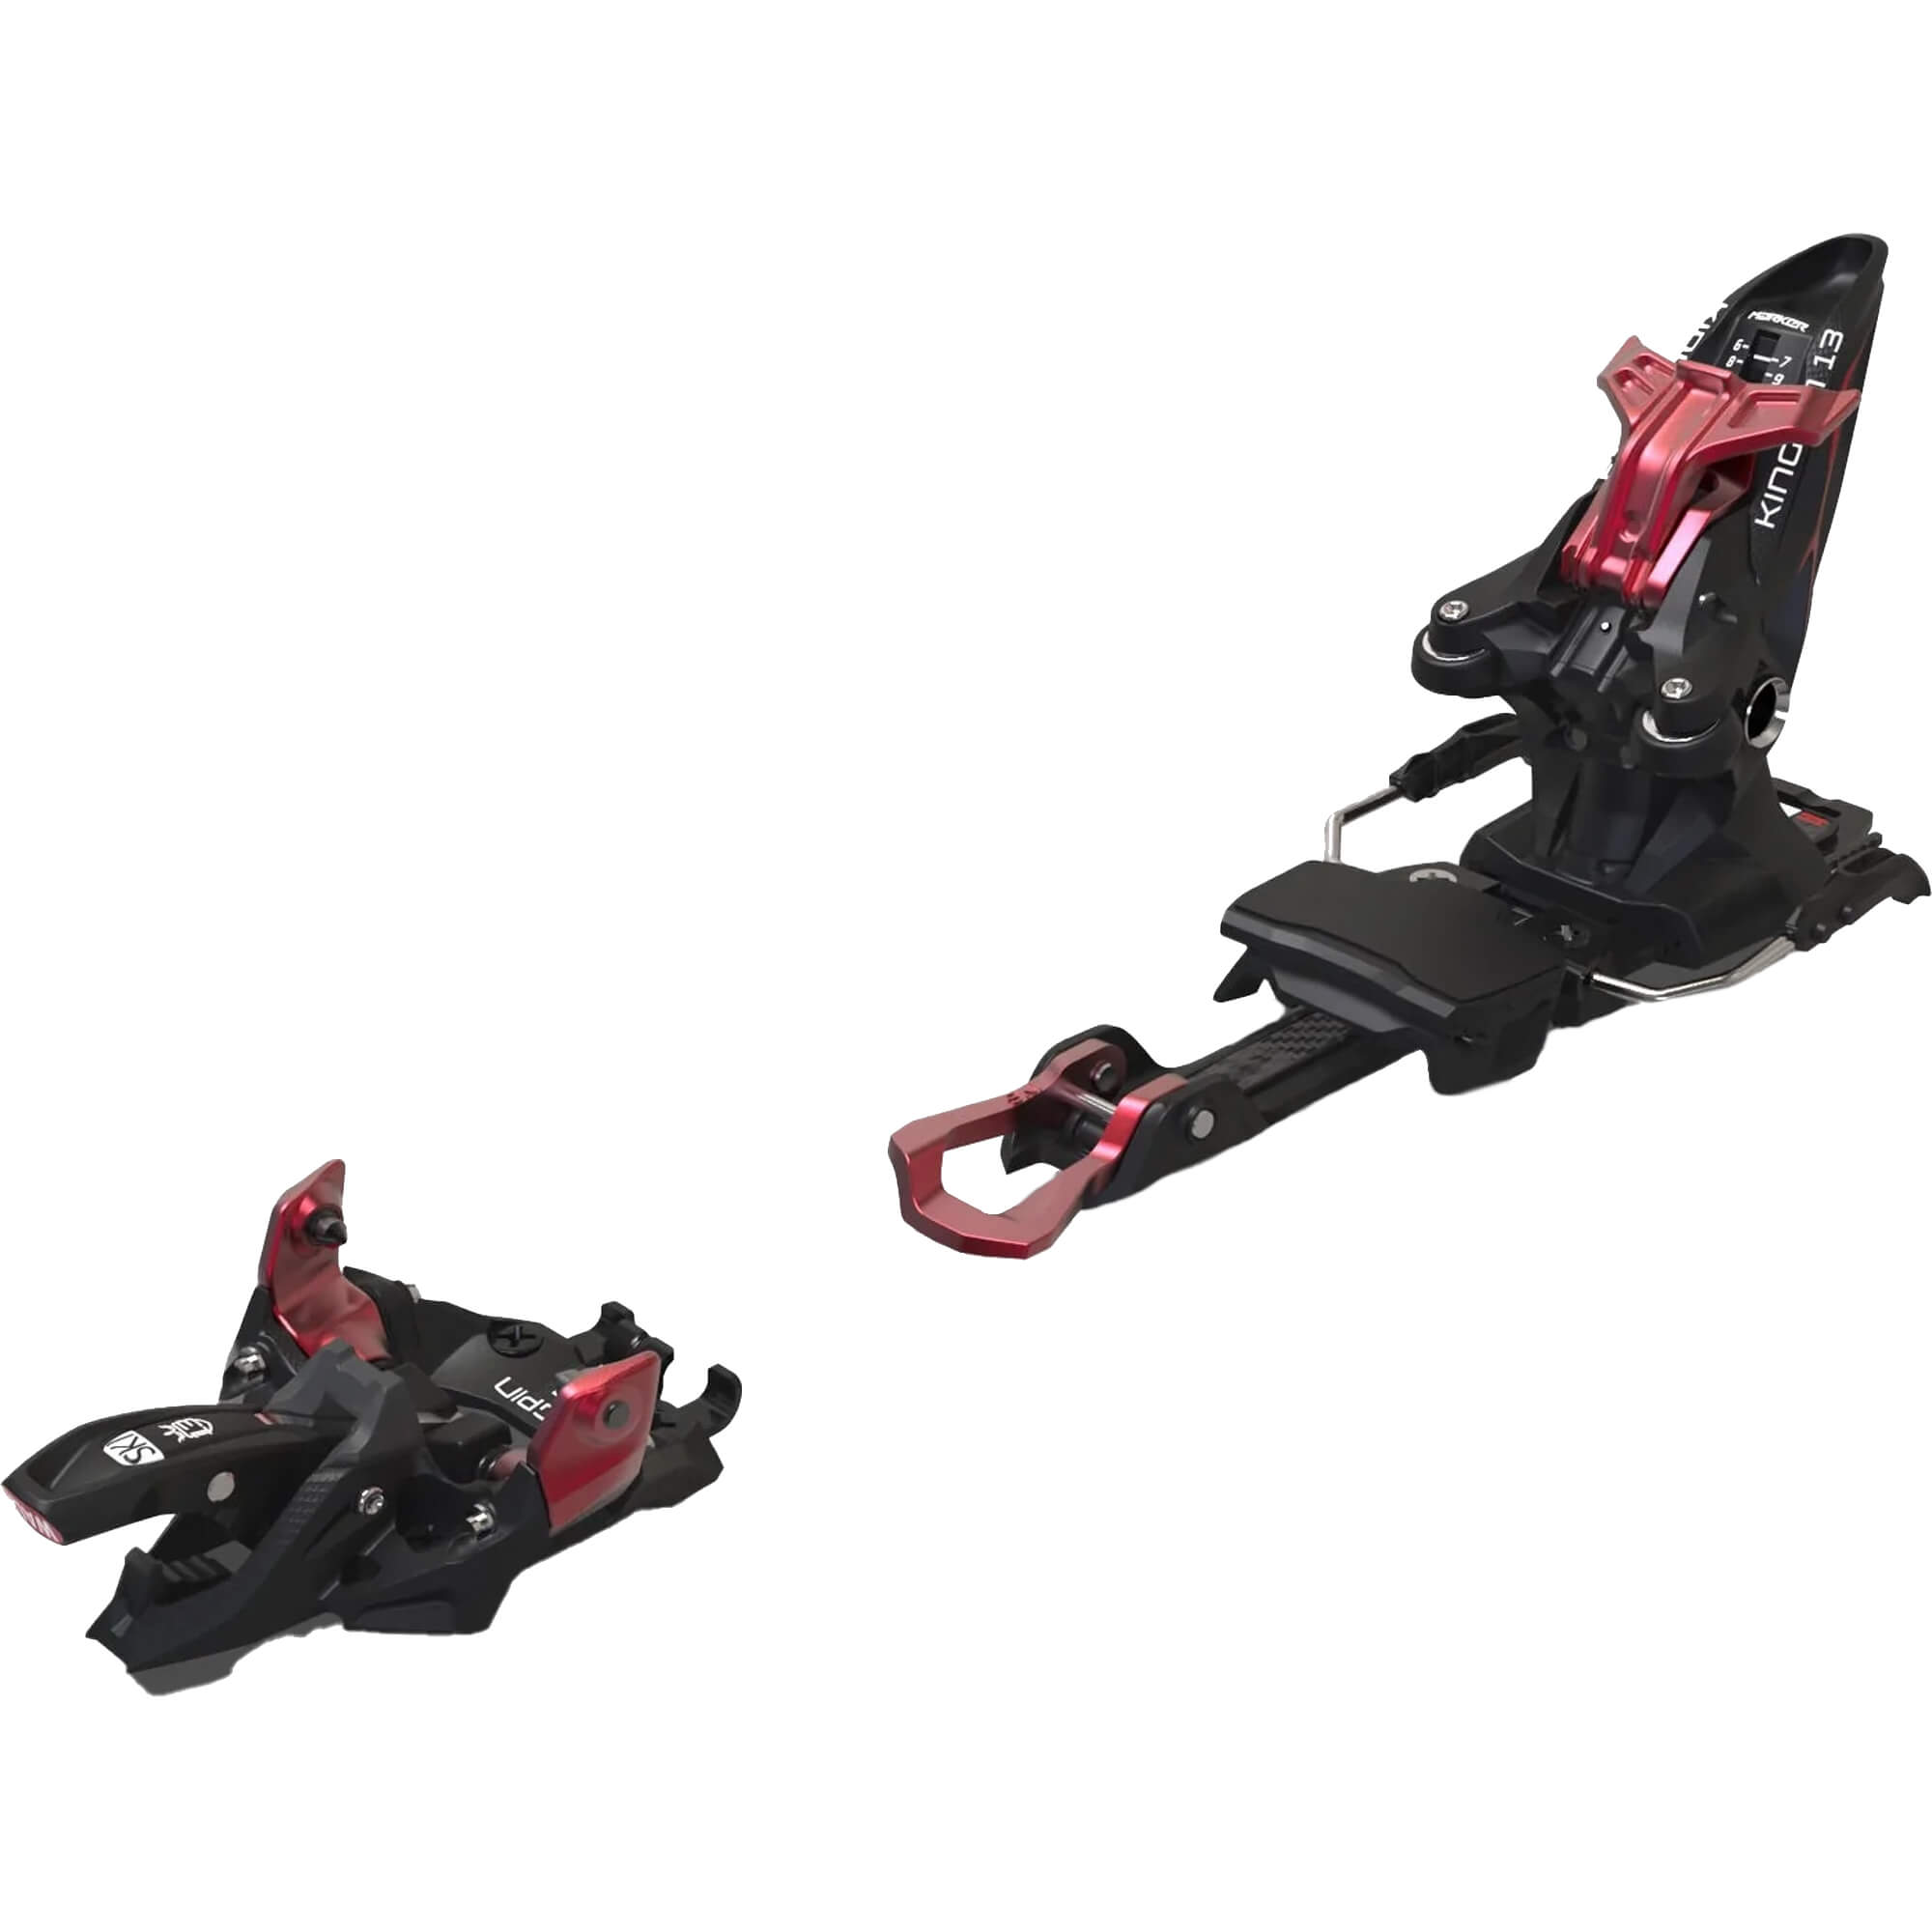 Photos - Other for Winter Sports Marker Kingpin 13 Ski Bindings, 100mm-125mm Black/Red 7933W1.MB 